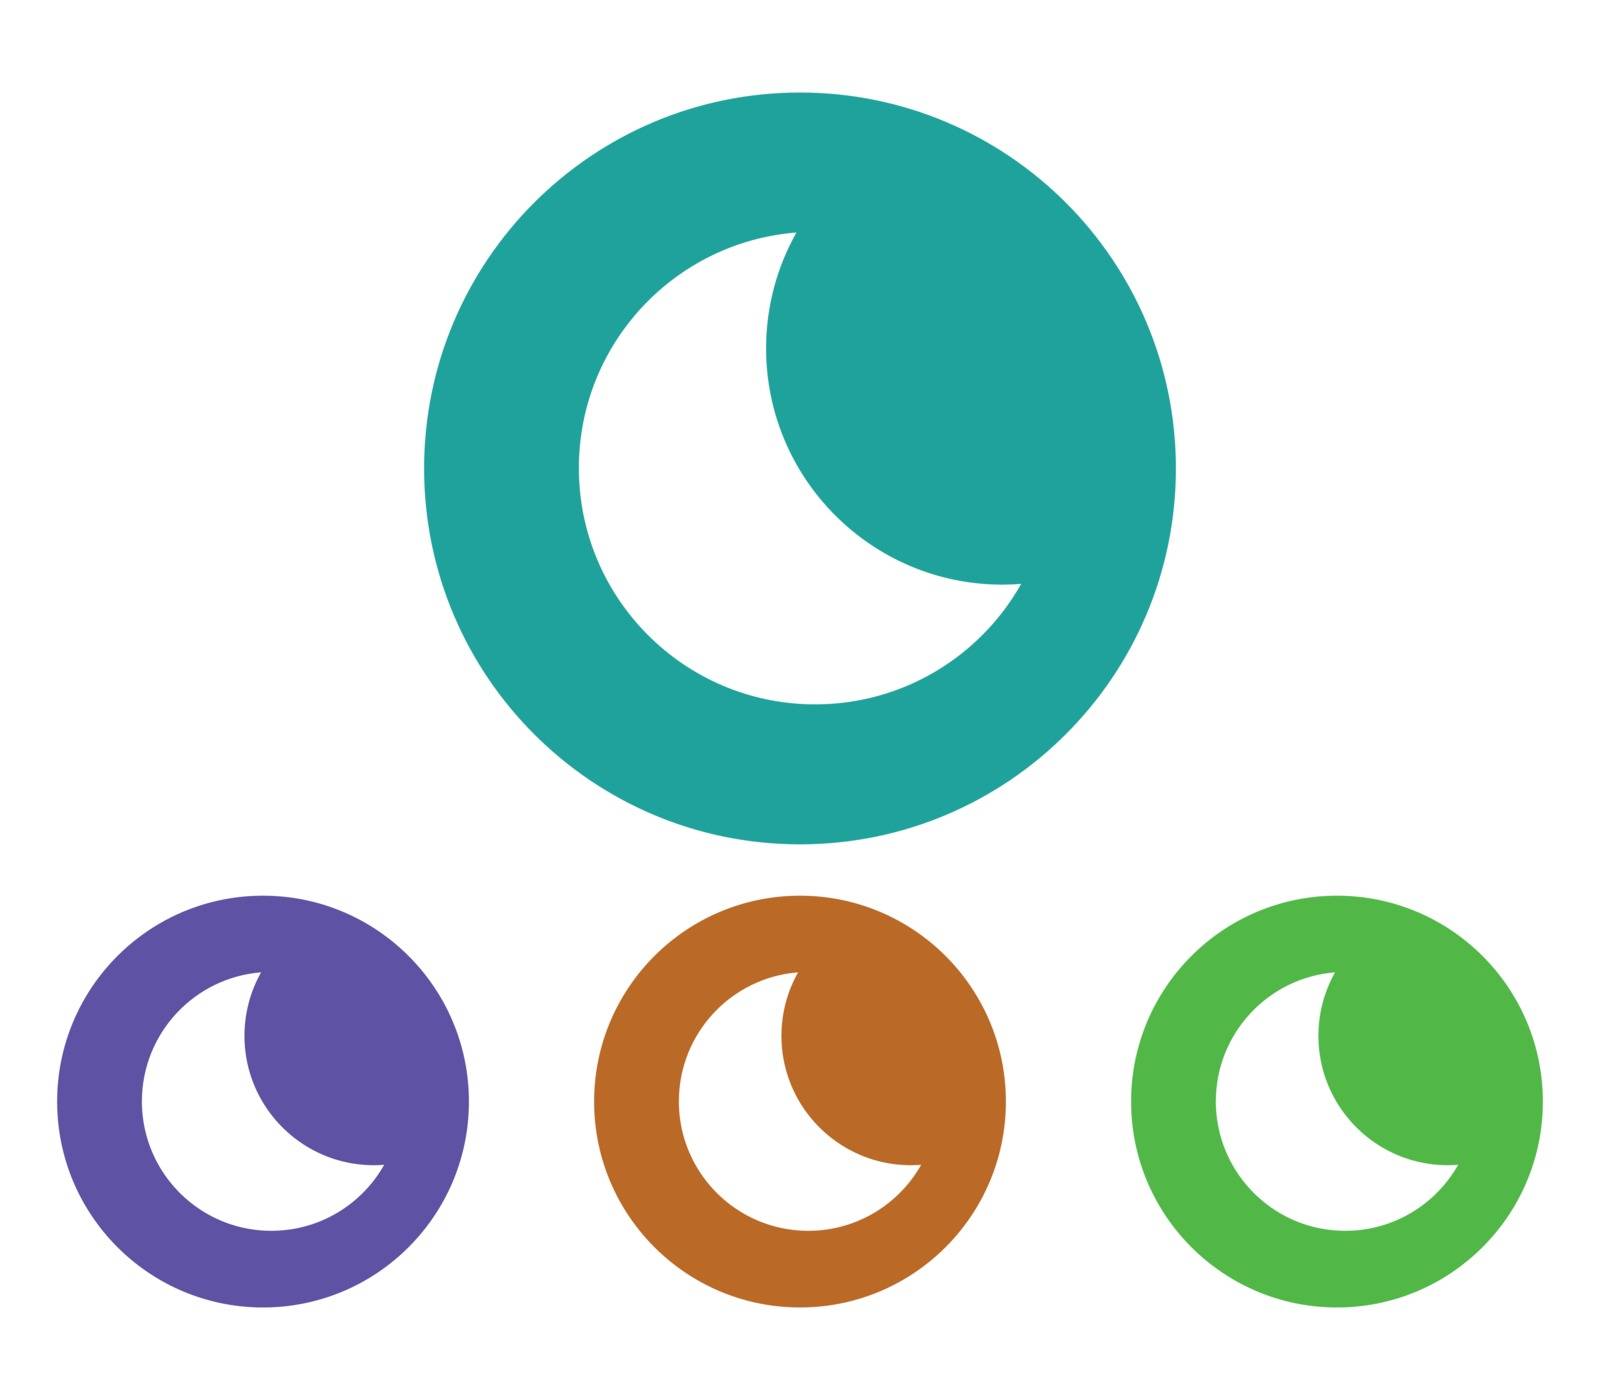 moon icon by Mark1987